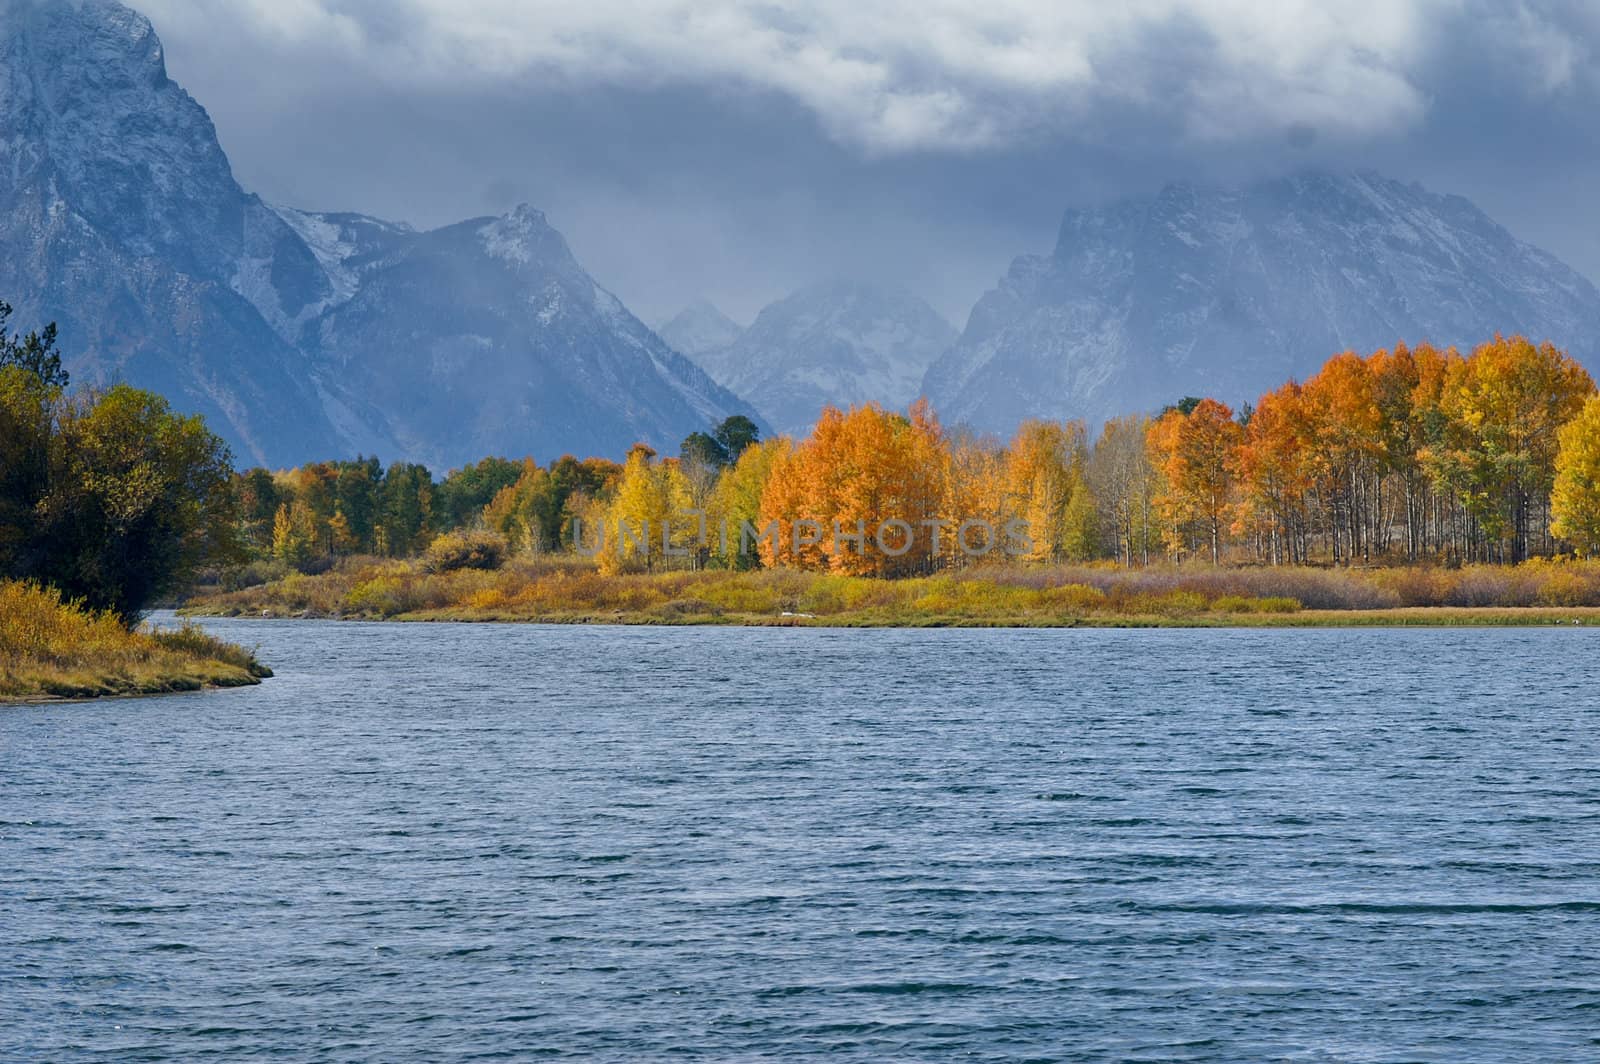 Autumn Glory in Grand Tetons by emattil